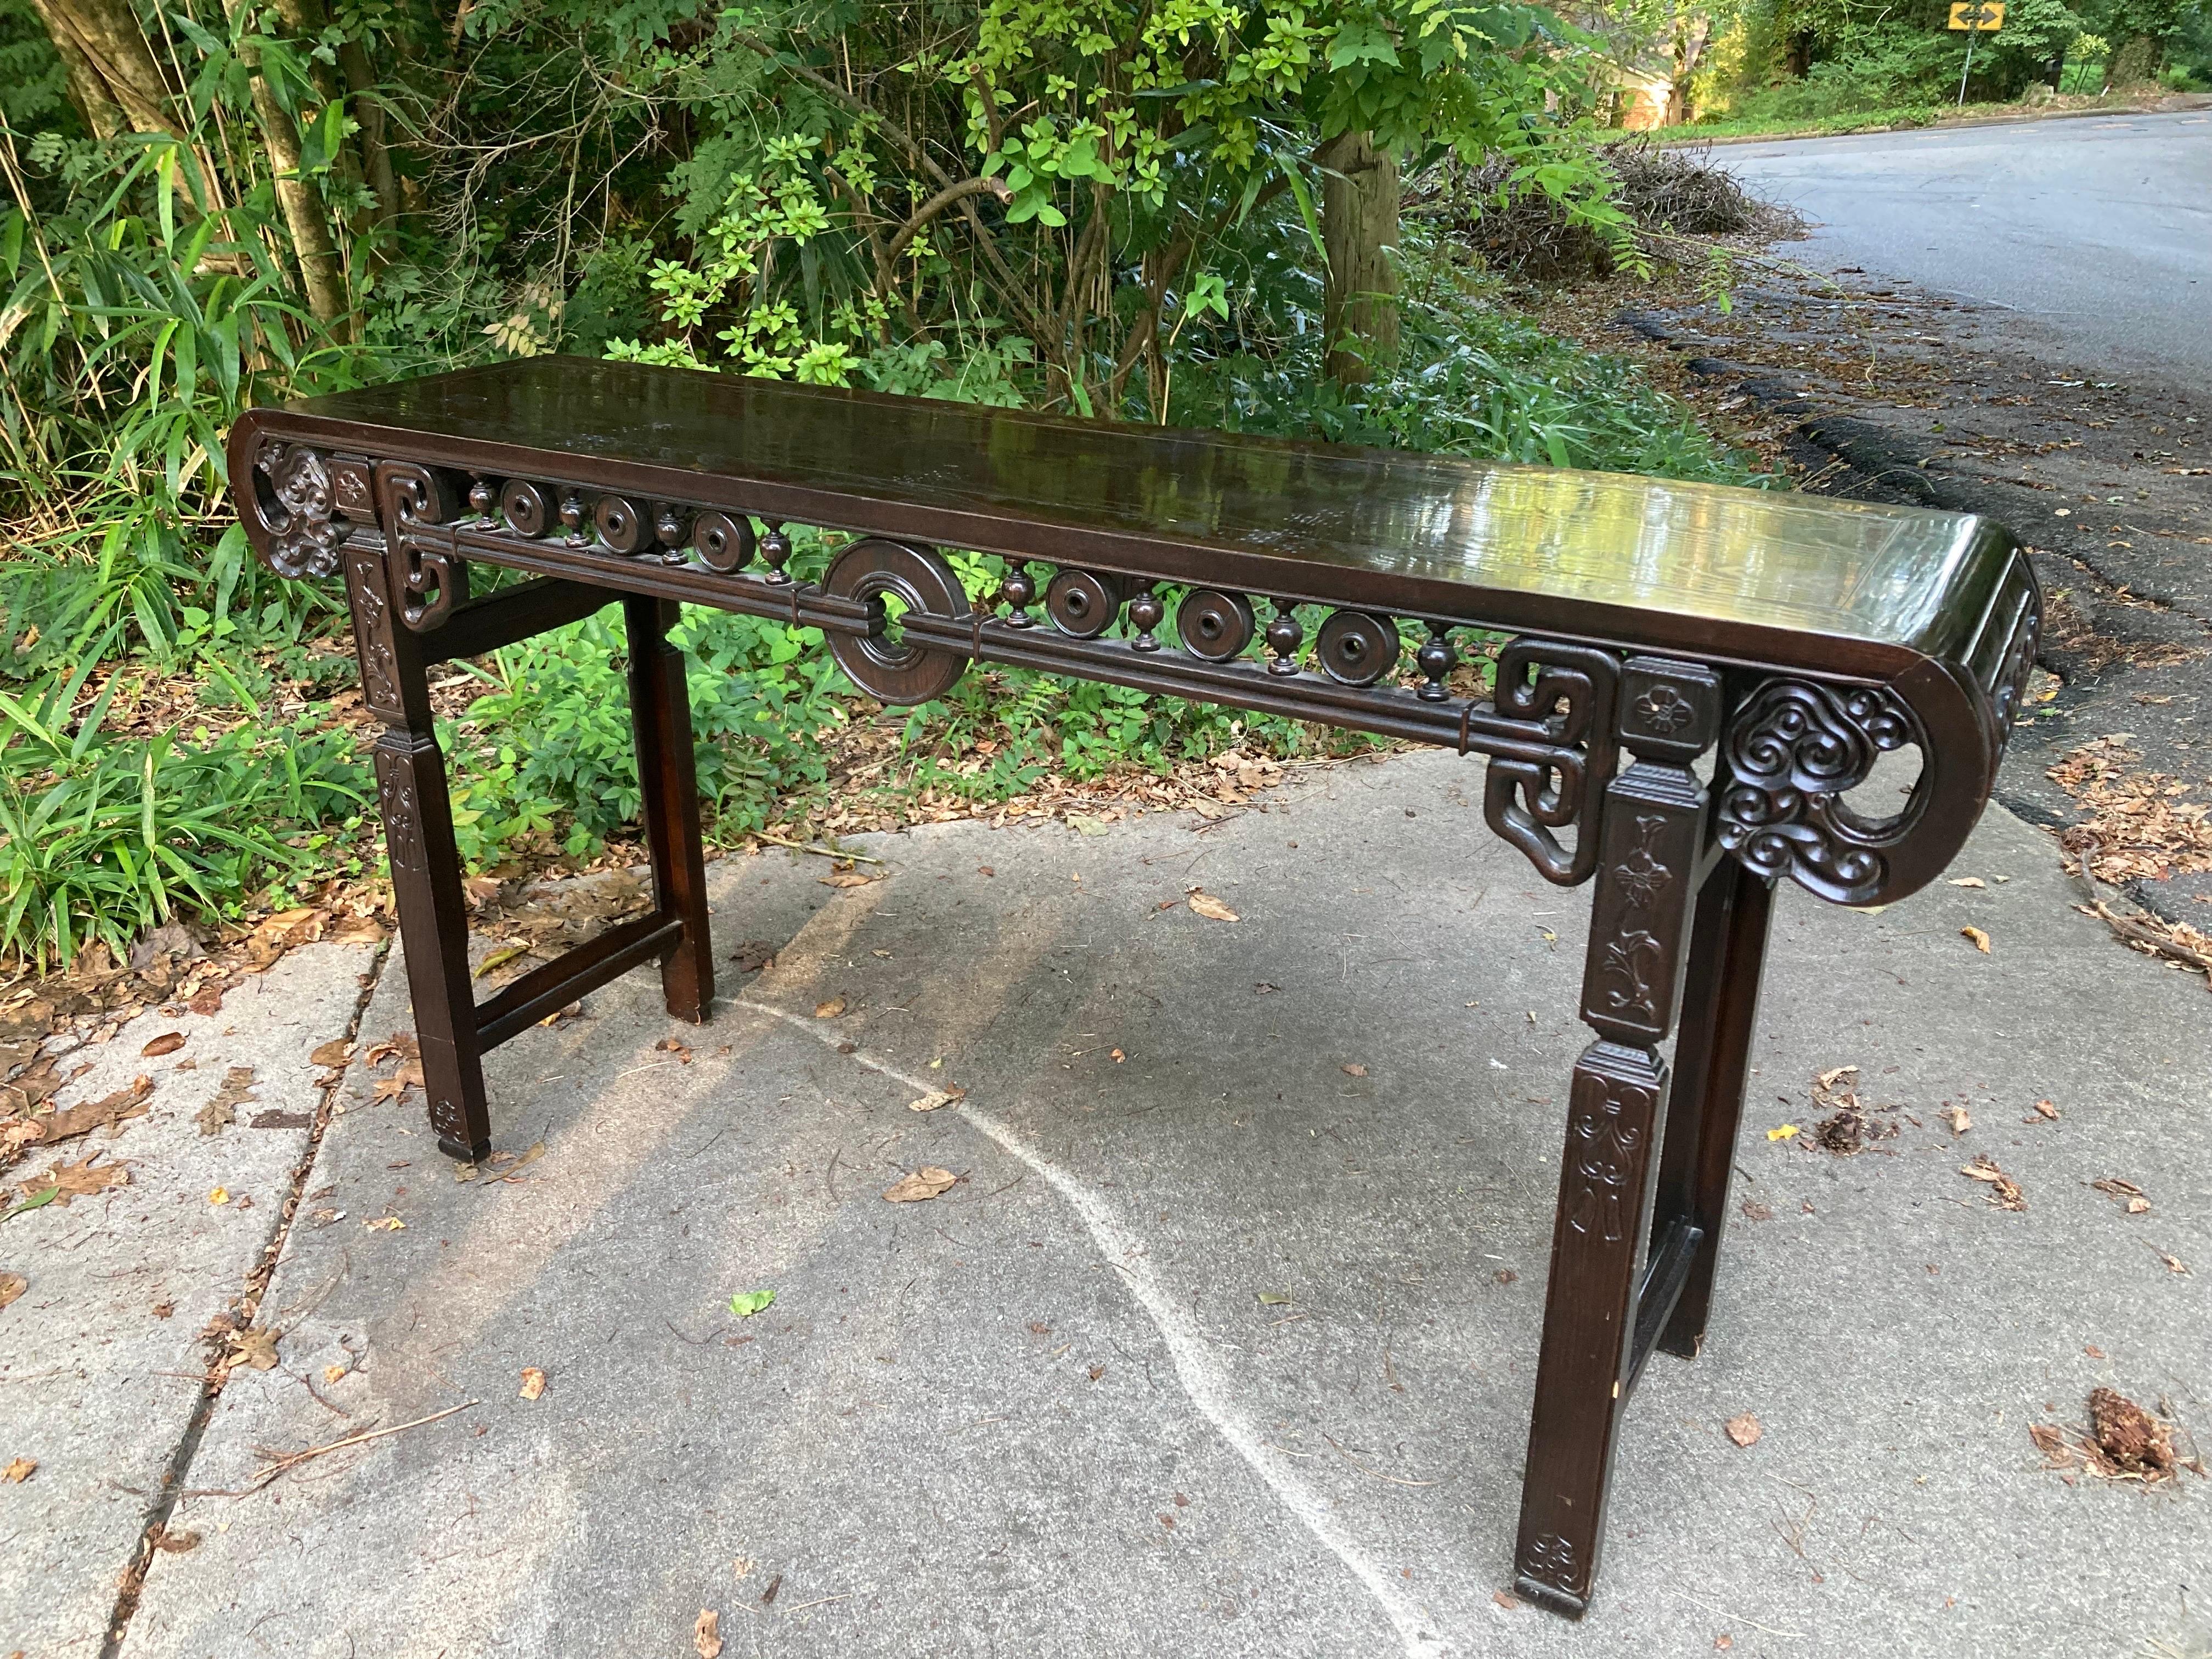 imported from mainland china, in 1972… hand carved detail, 33 tall, 64 wide and 15.5 deep… solid design… table can float in any room… piano lacquer finish on top of table…
shipping from athens, ga